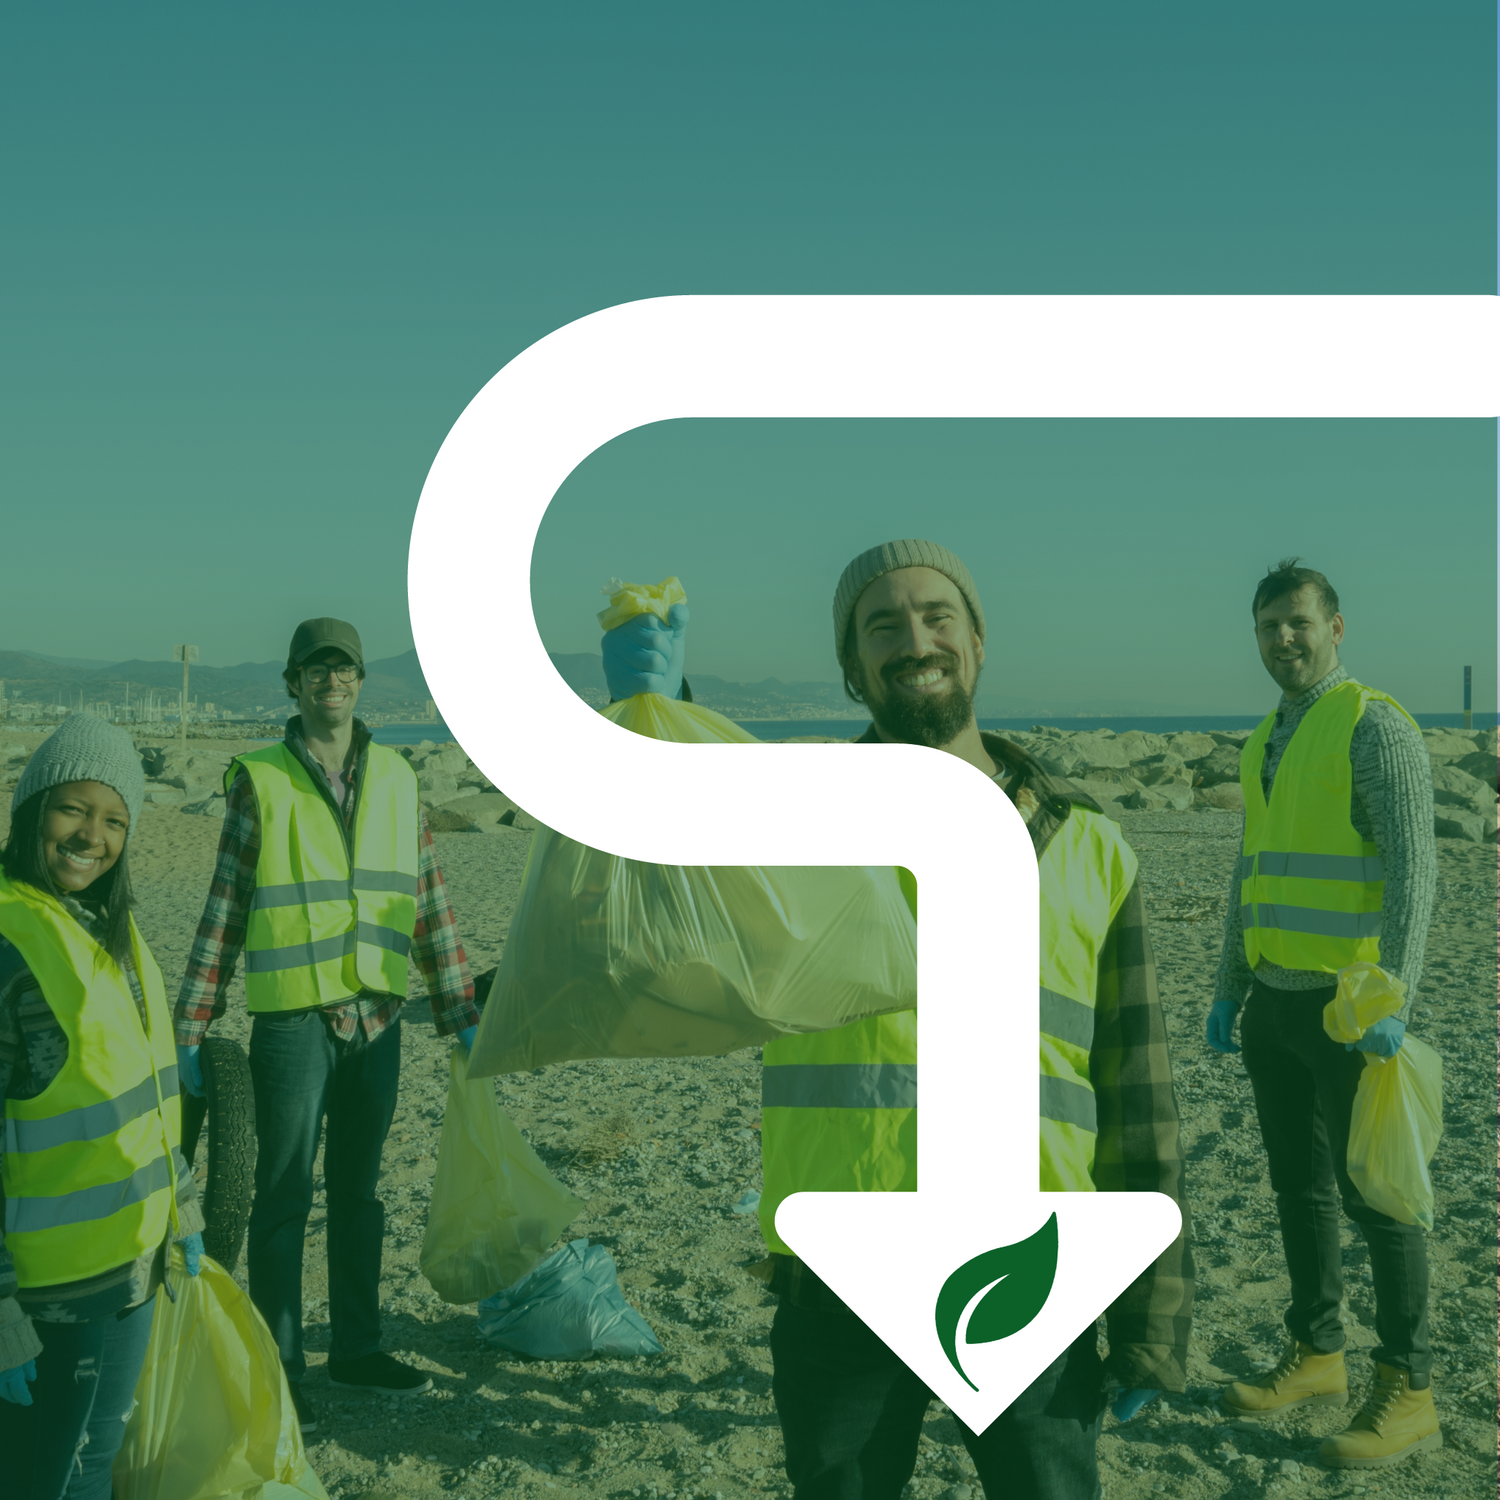 A group of people wearing safety vests on a beach cleaning plastic waste from the sand. There is a man in the front holding up a full bag of waste and smiling. A white arrow pointing down with a leaf in the center.